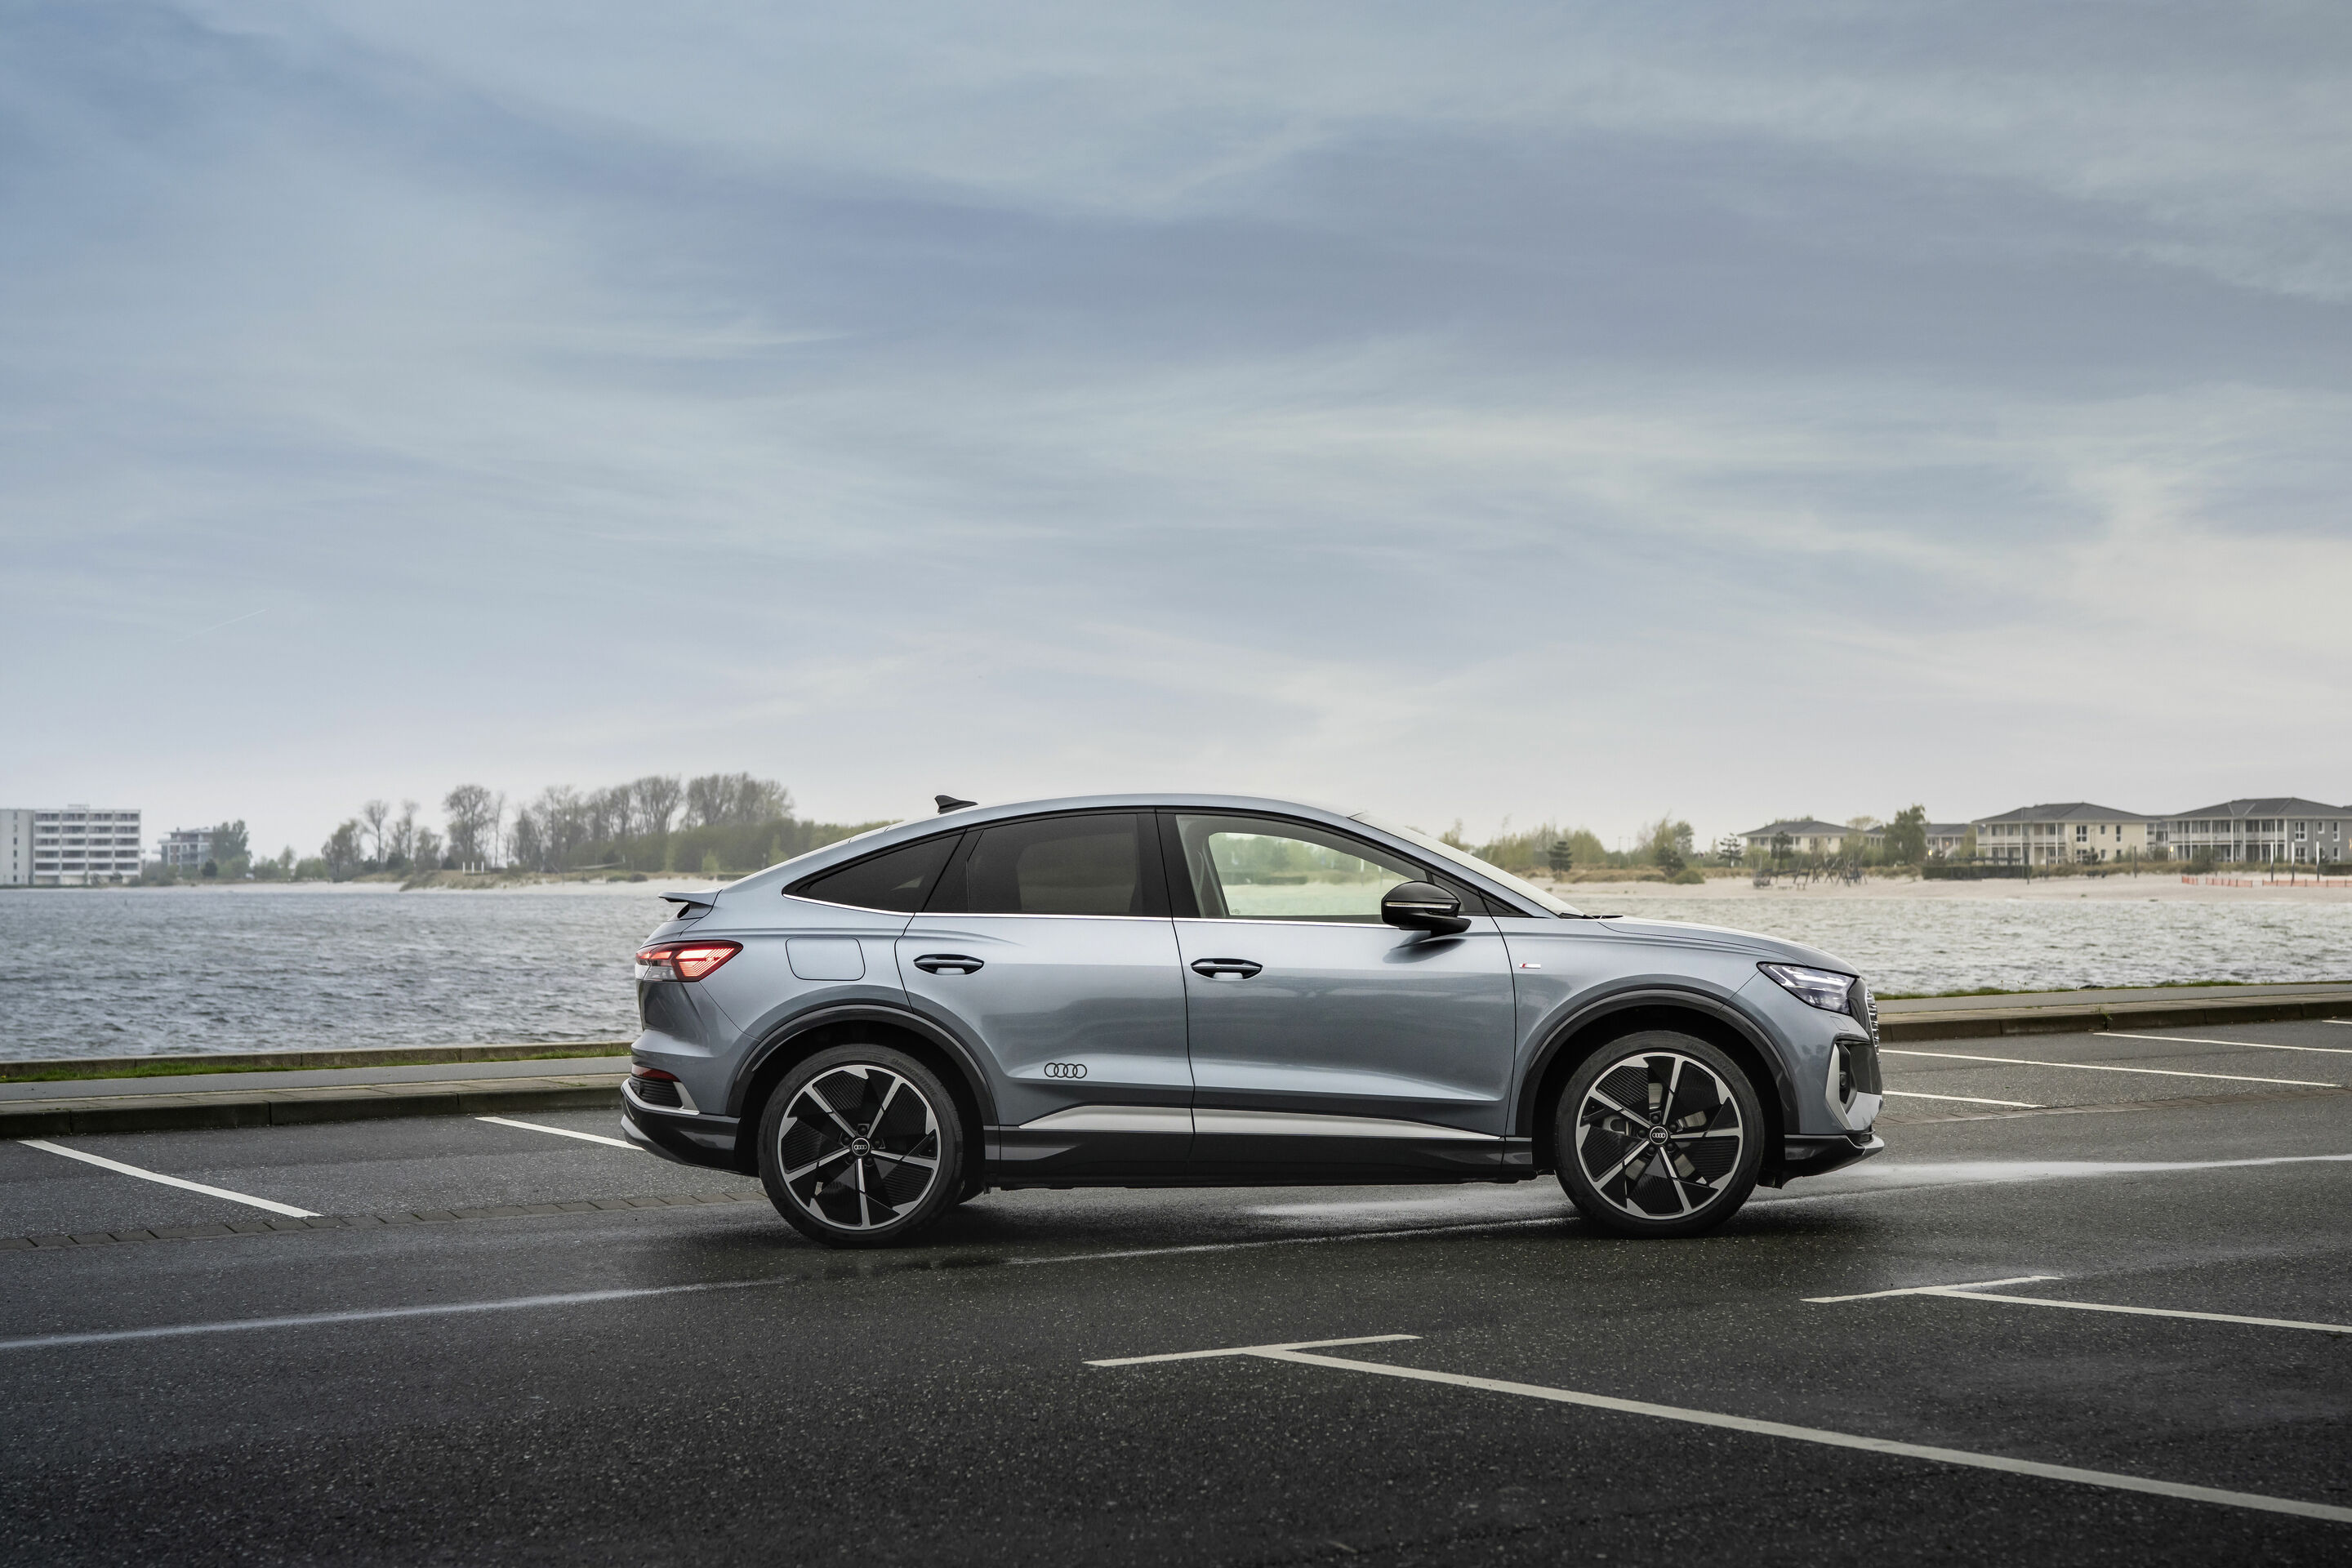 Audi Q4 e-tron updated with longer range, more power and better equipment  for 2024 - ArenaEV